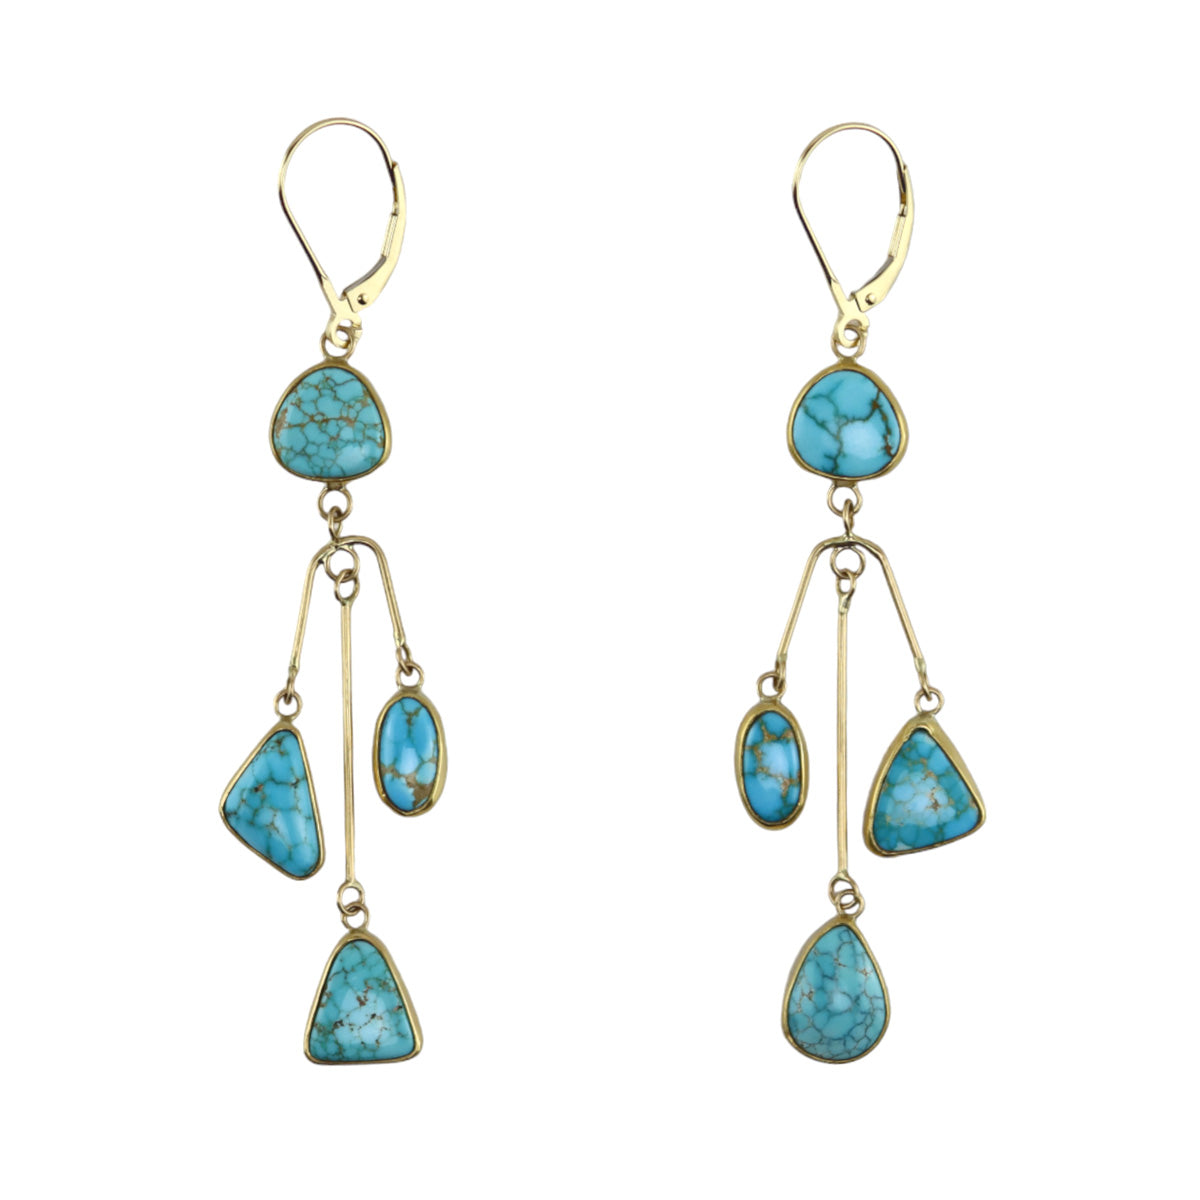 SOLD Sam Patania - "Turquoise Dancers" Number 8 Turquoise and 18K Gold Hook Earrings, 3" x 1.75" (J91699-1123-008)